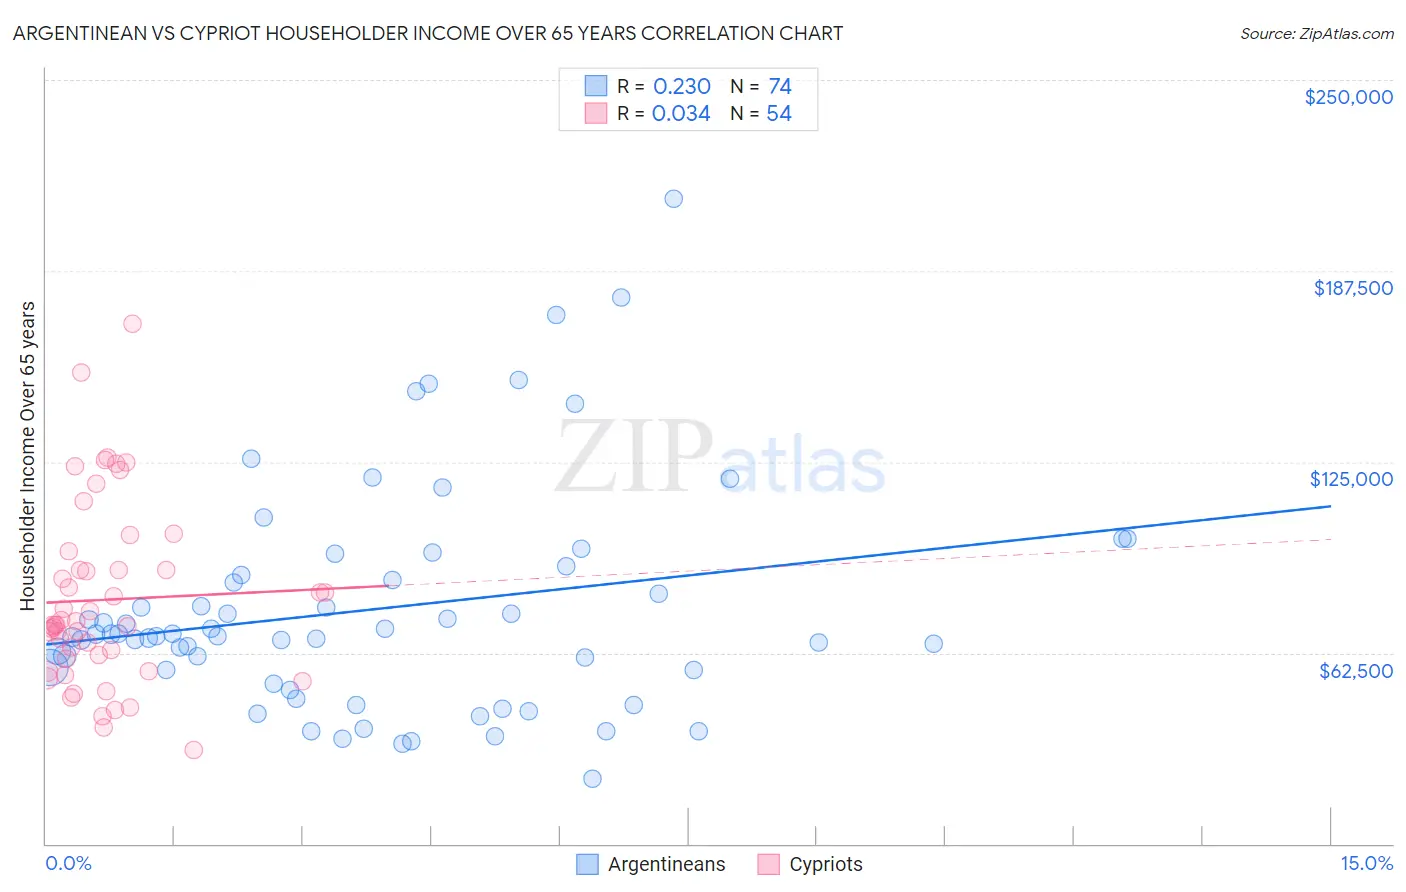 Argentinean vs Cypriot Householder Income Over 65 years